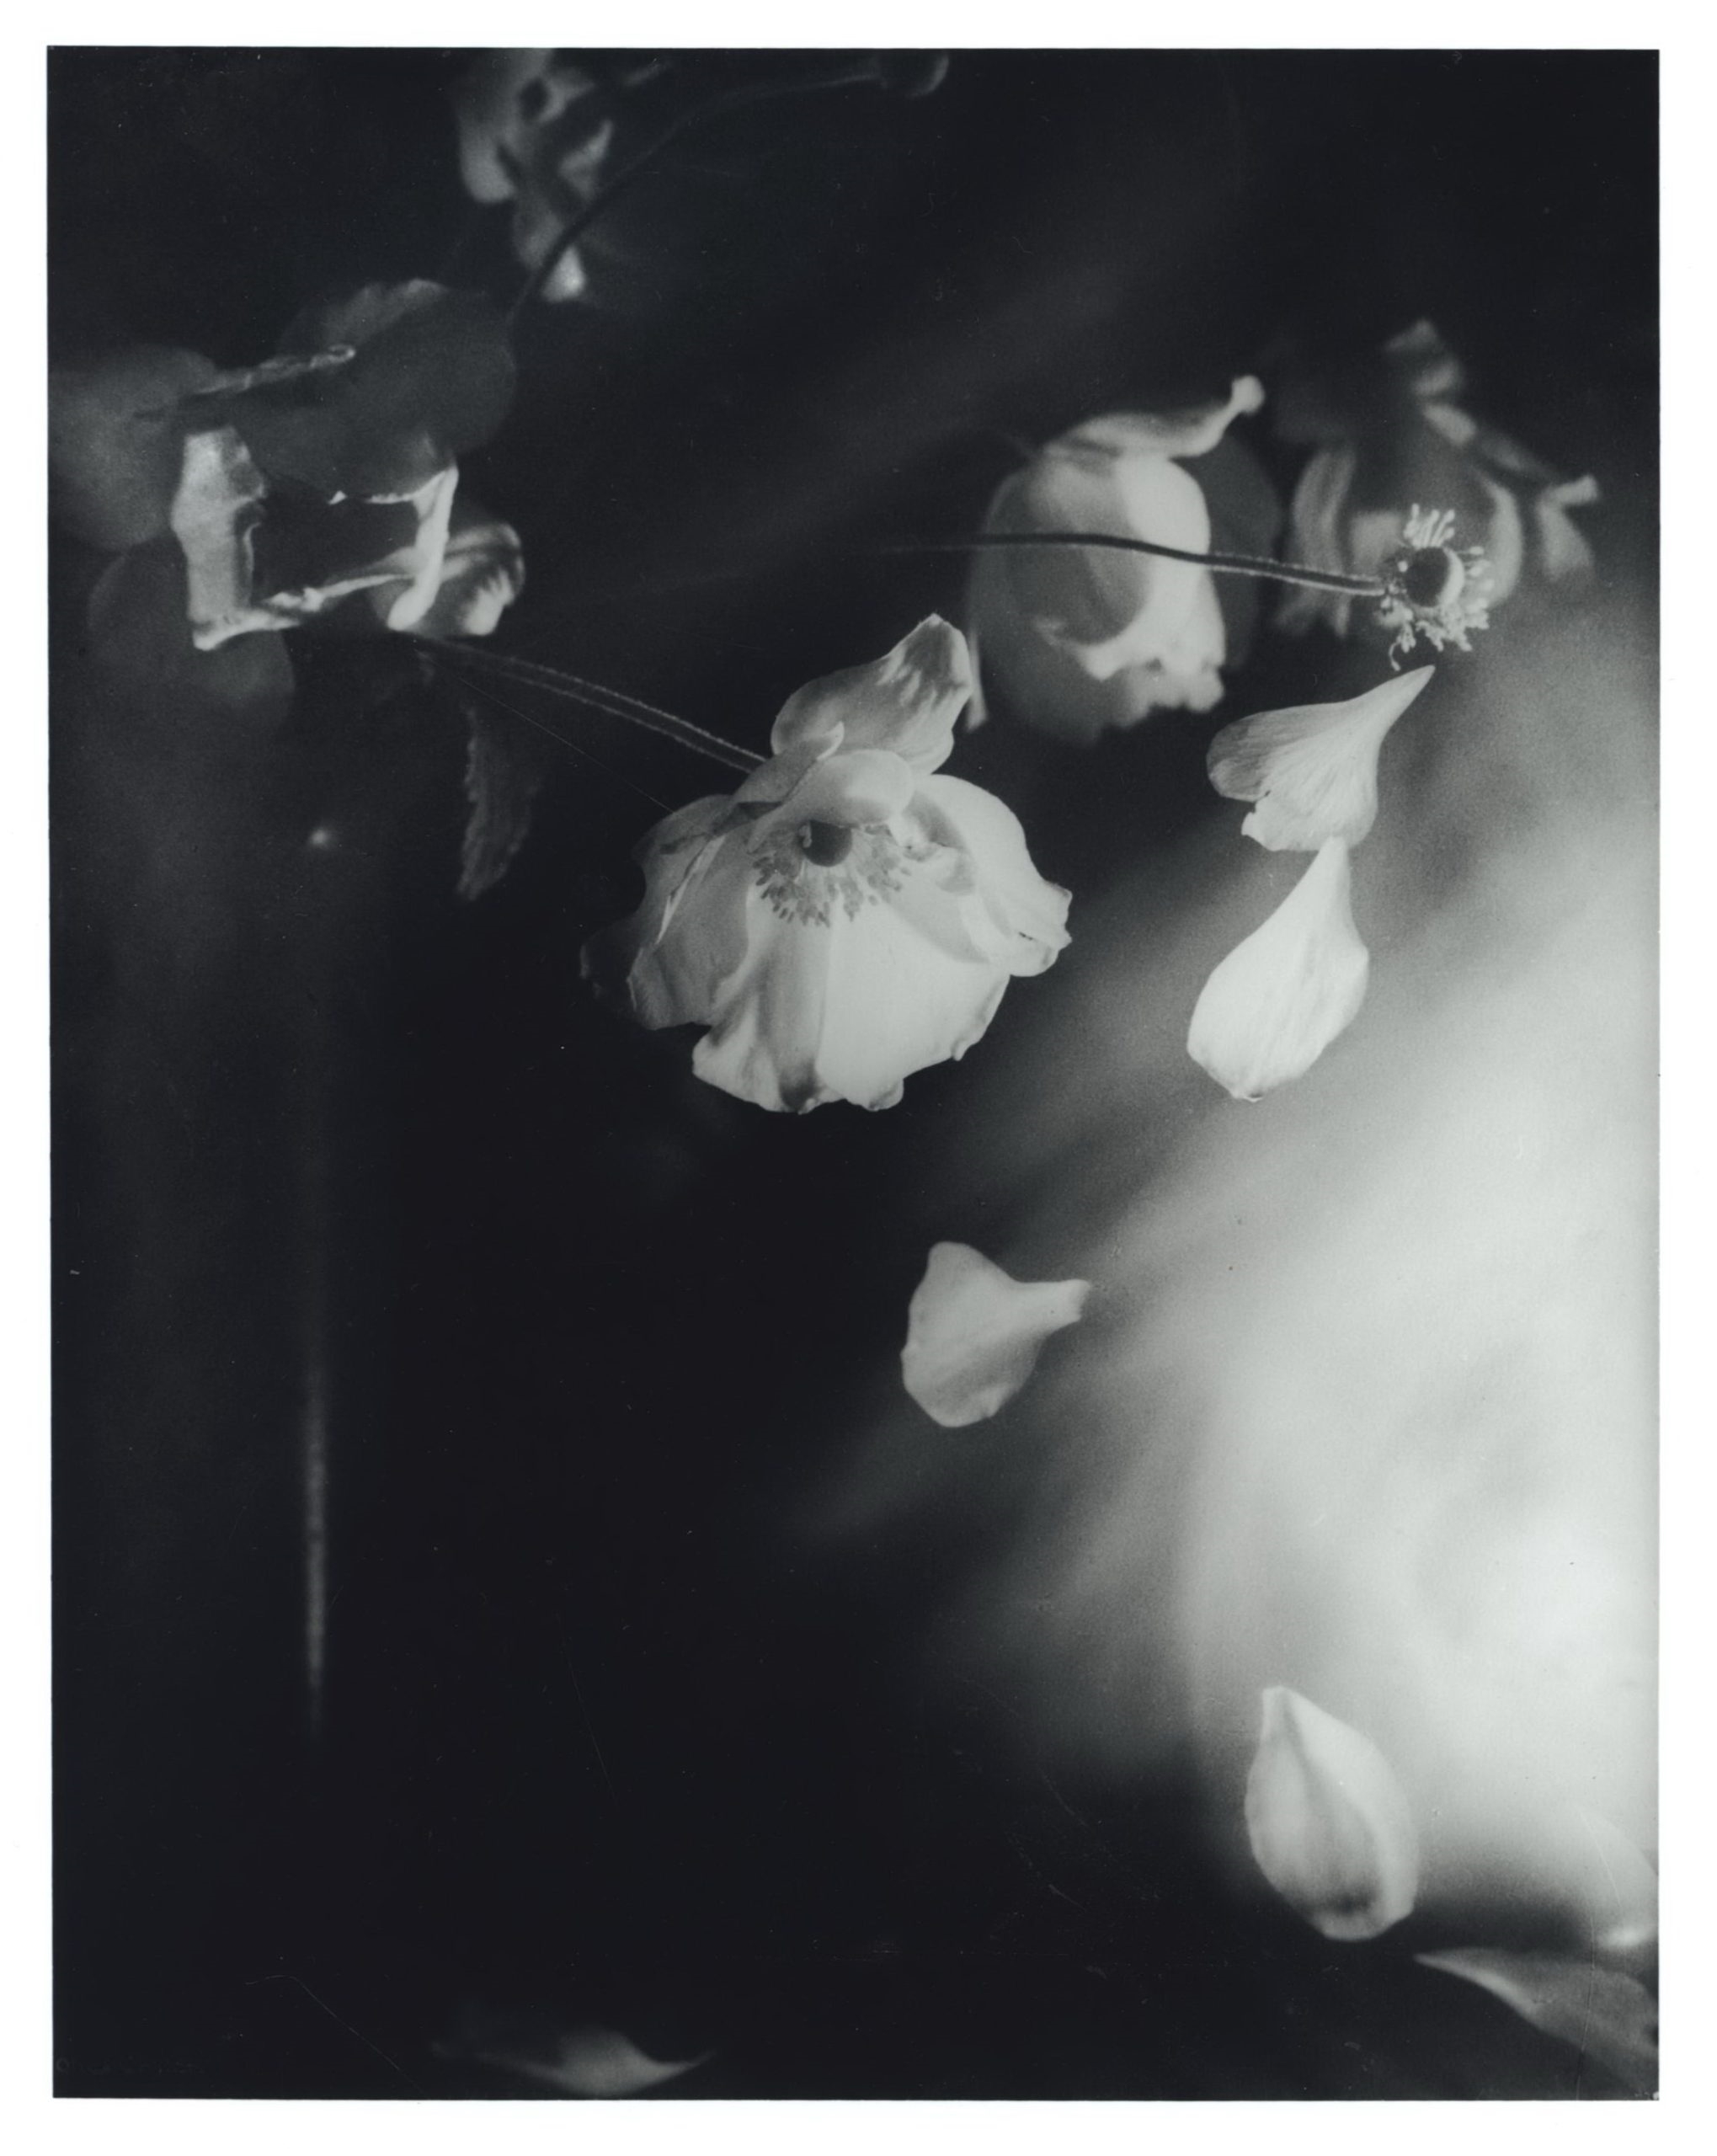 Windflowers by Olive Cotton, 1939